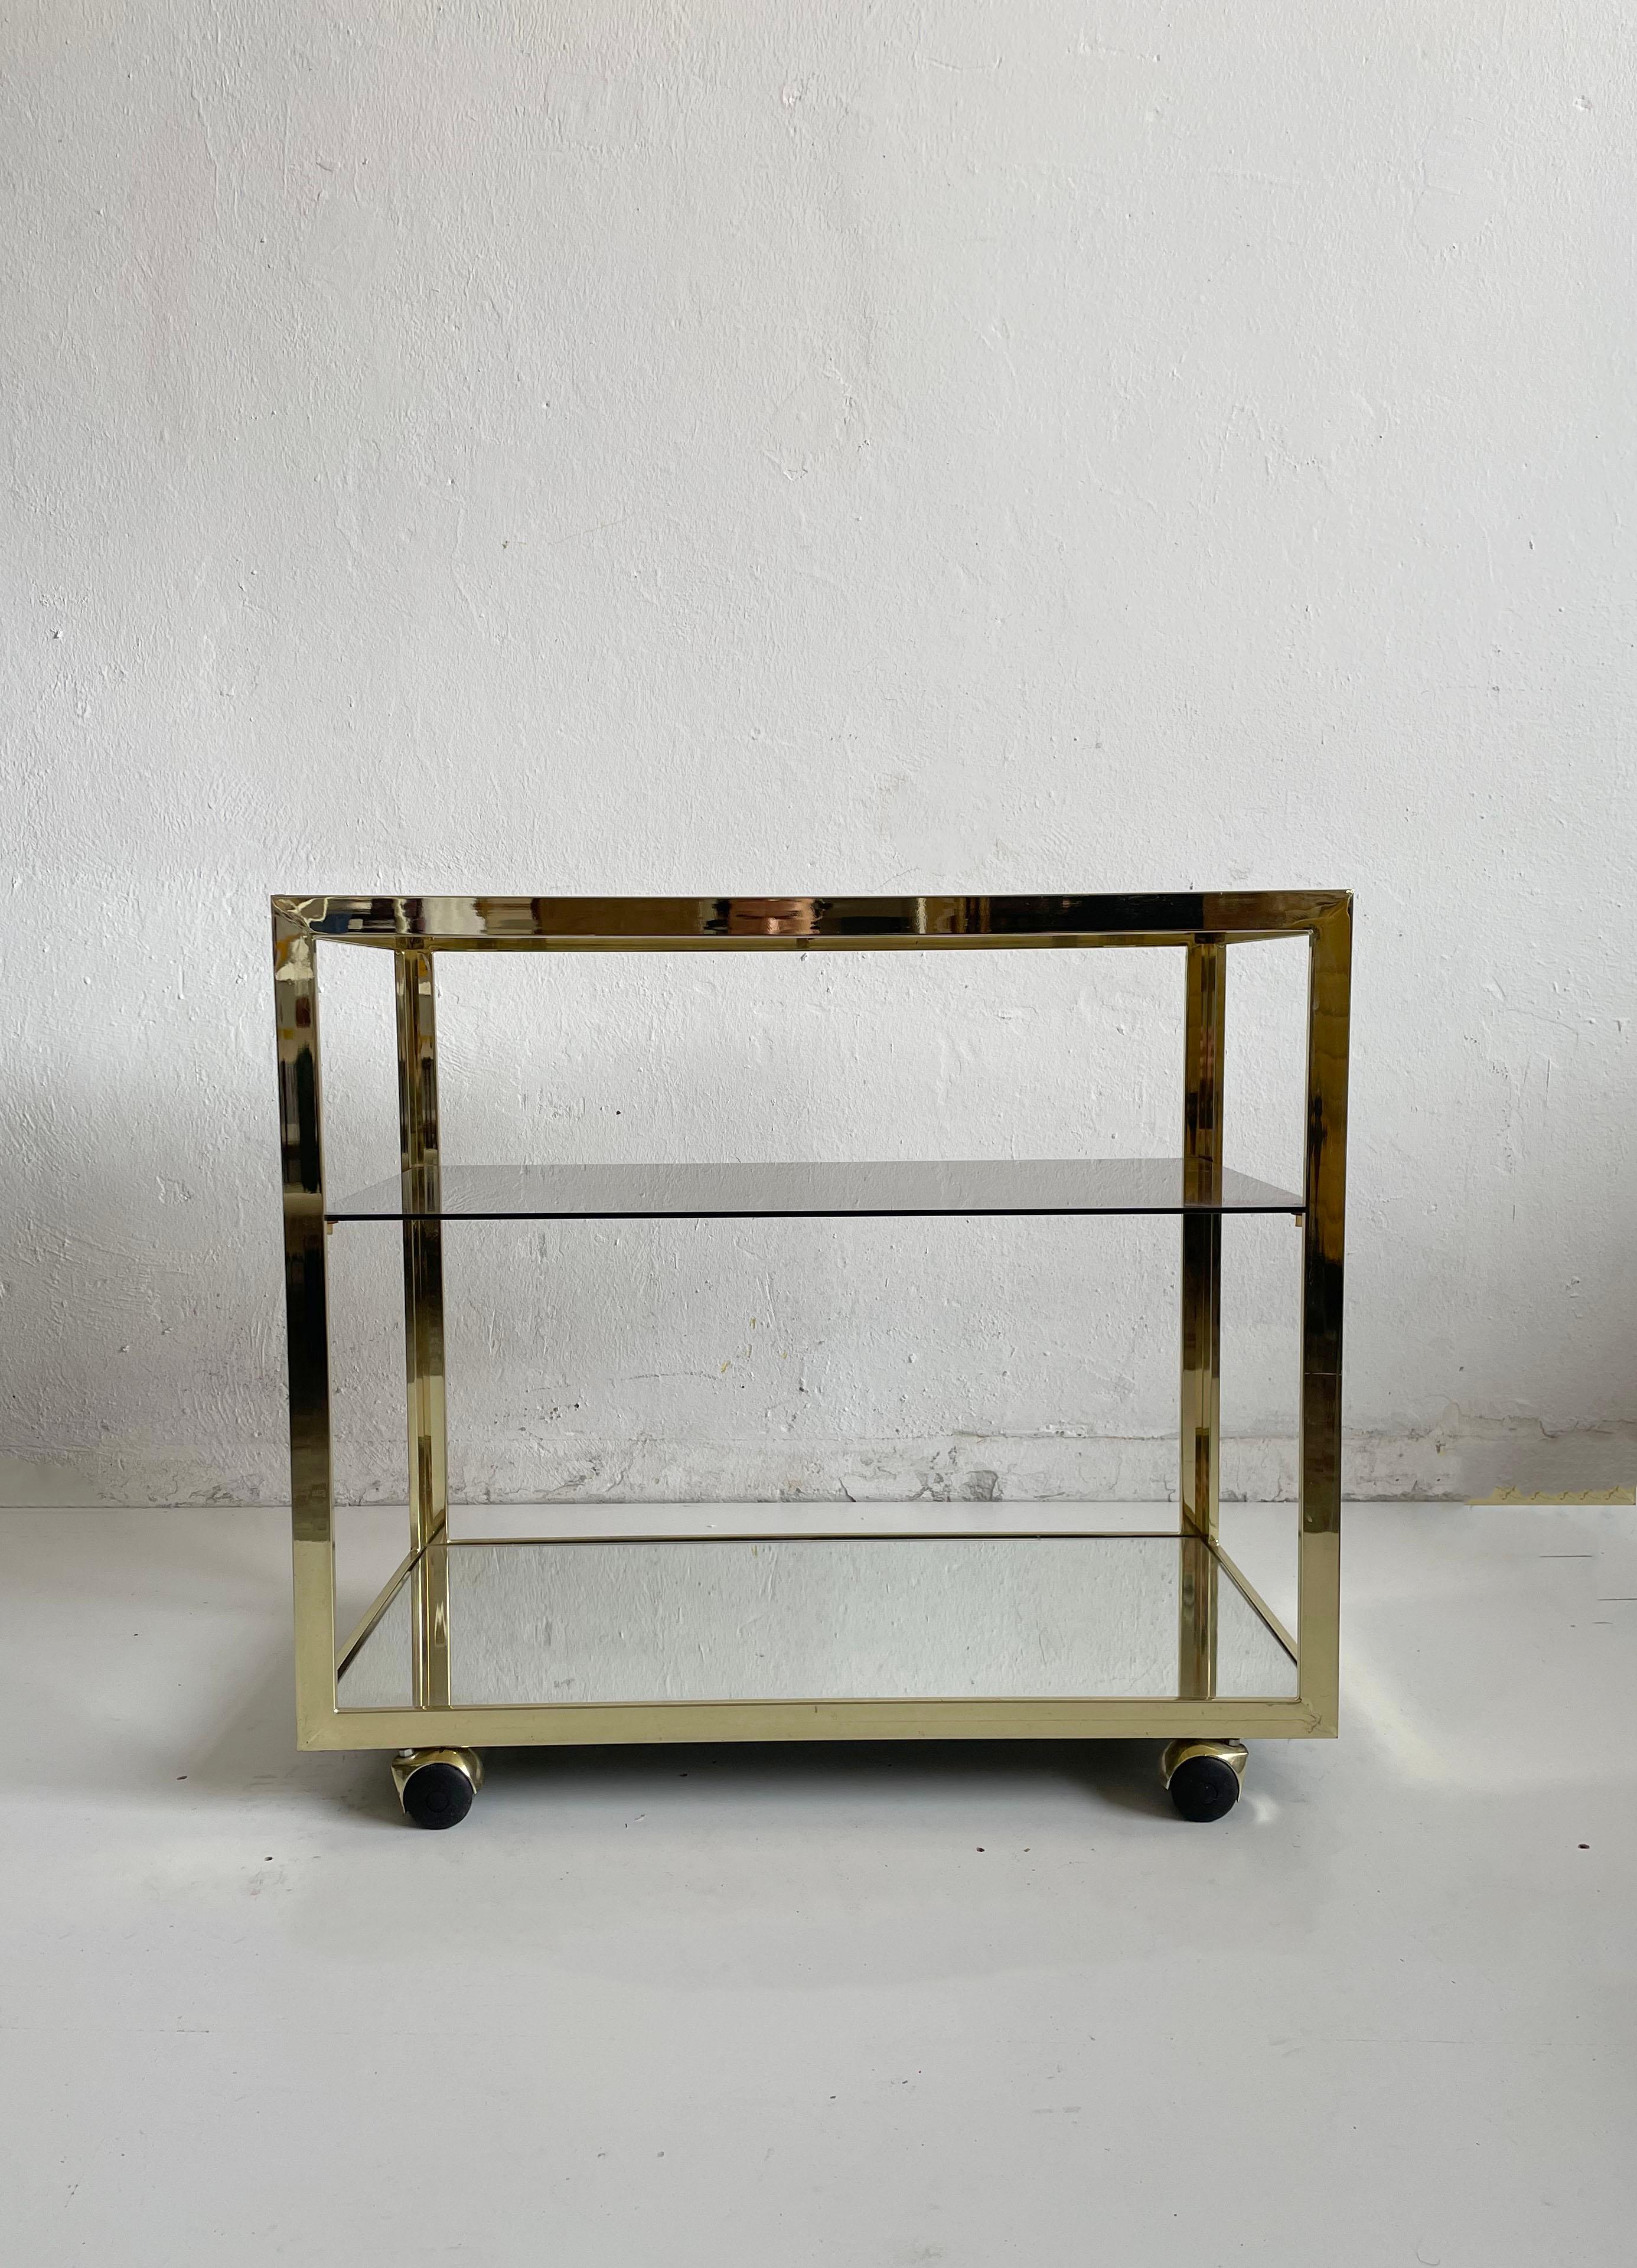 Very elegant, minimalist bar cart with three glass shelves and brass plated metal frame
One of the glass shelves is mirrored glass, the other two are tinted glass

The structure is very sturdy, glass without damage, few small and hardly